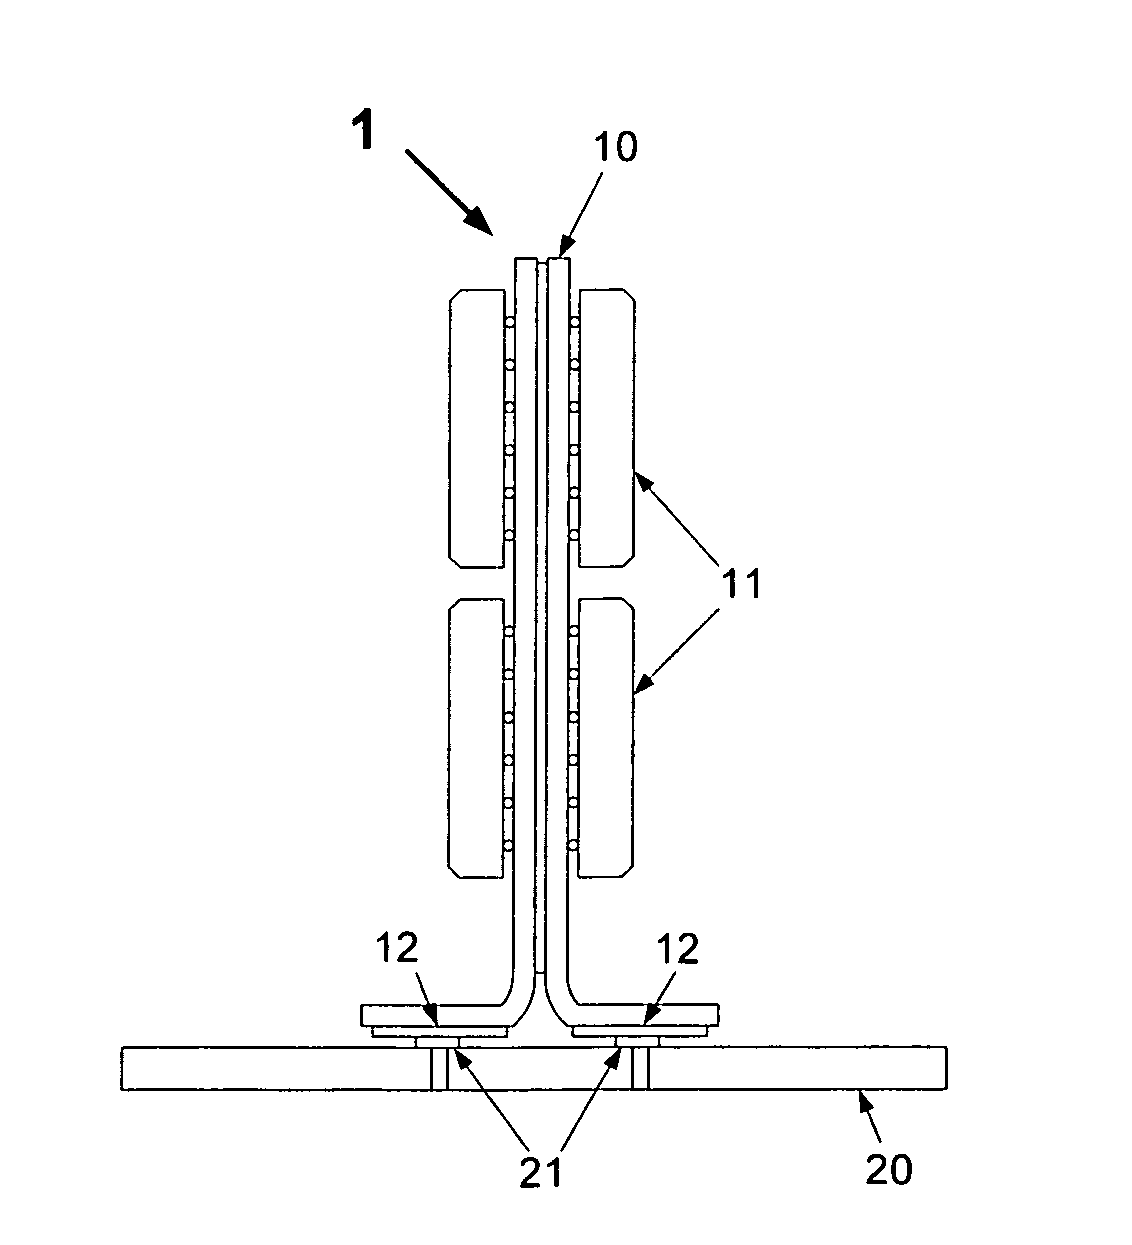 Rigid circuit board with flexibly attached module